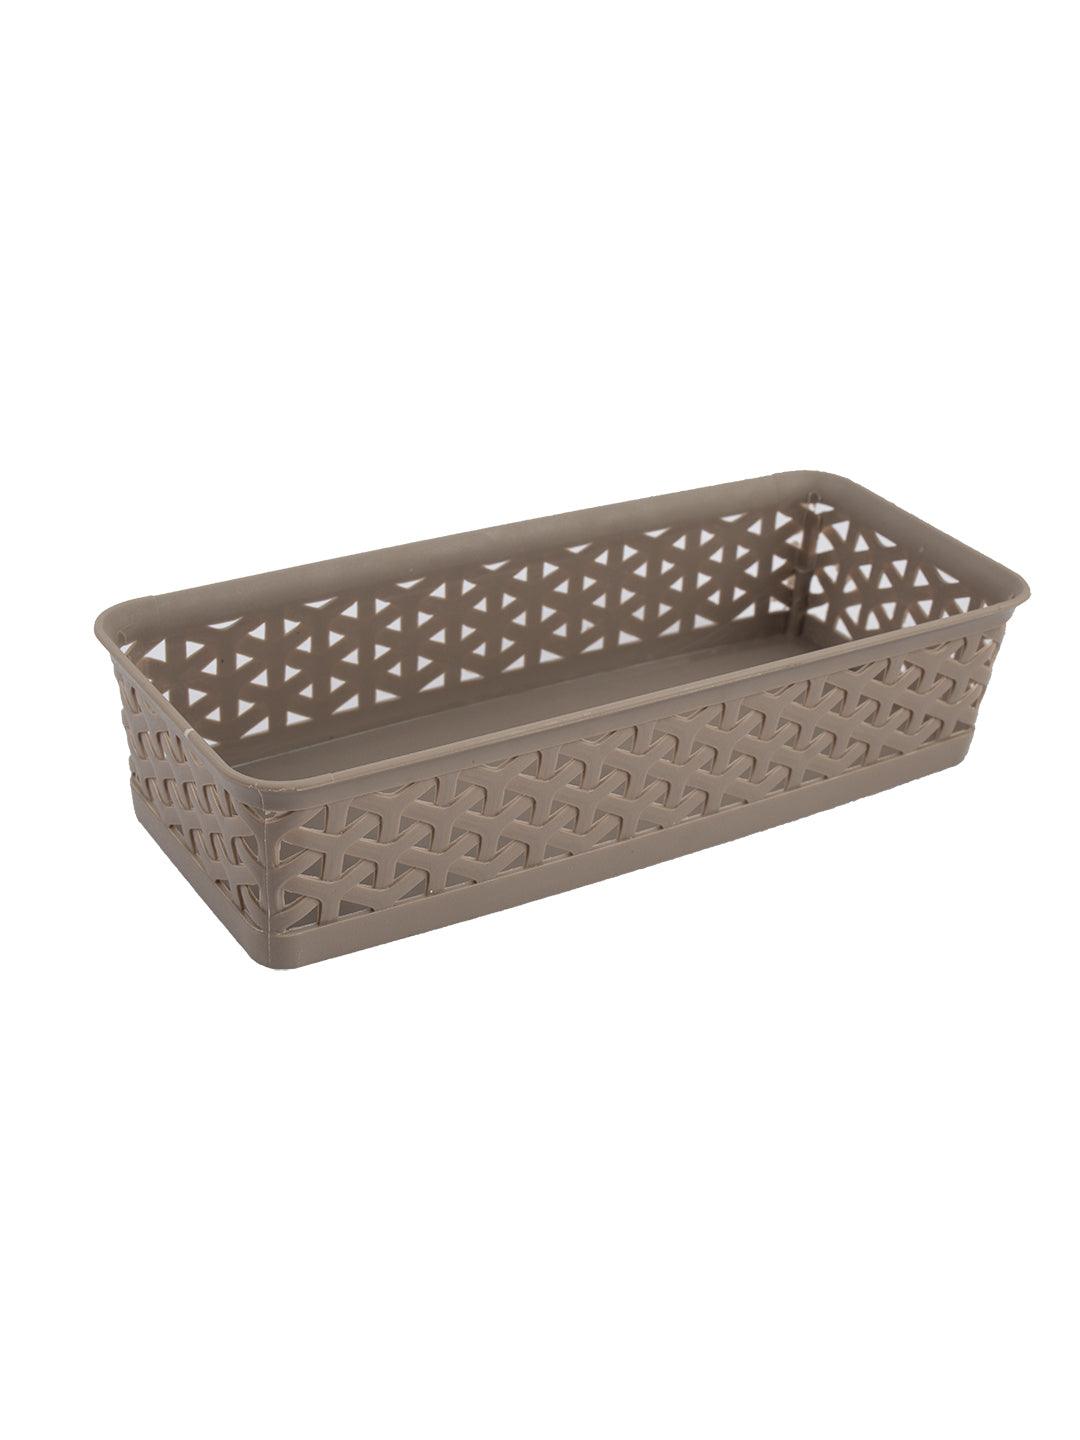 Baskets, Small, Brown, Plastic, Set of 6 | Assorted - MARKET 99